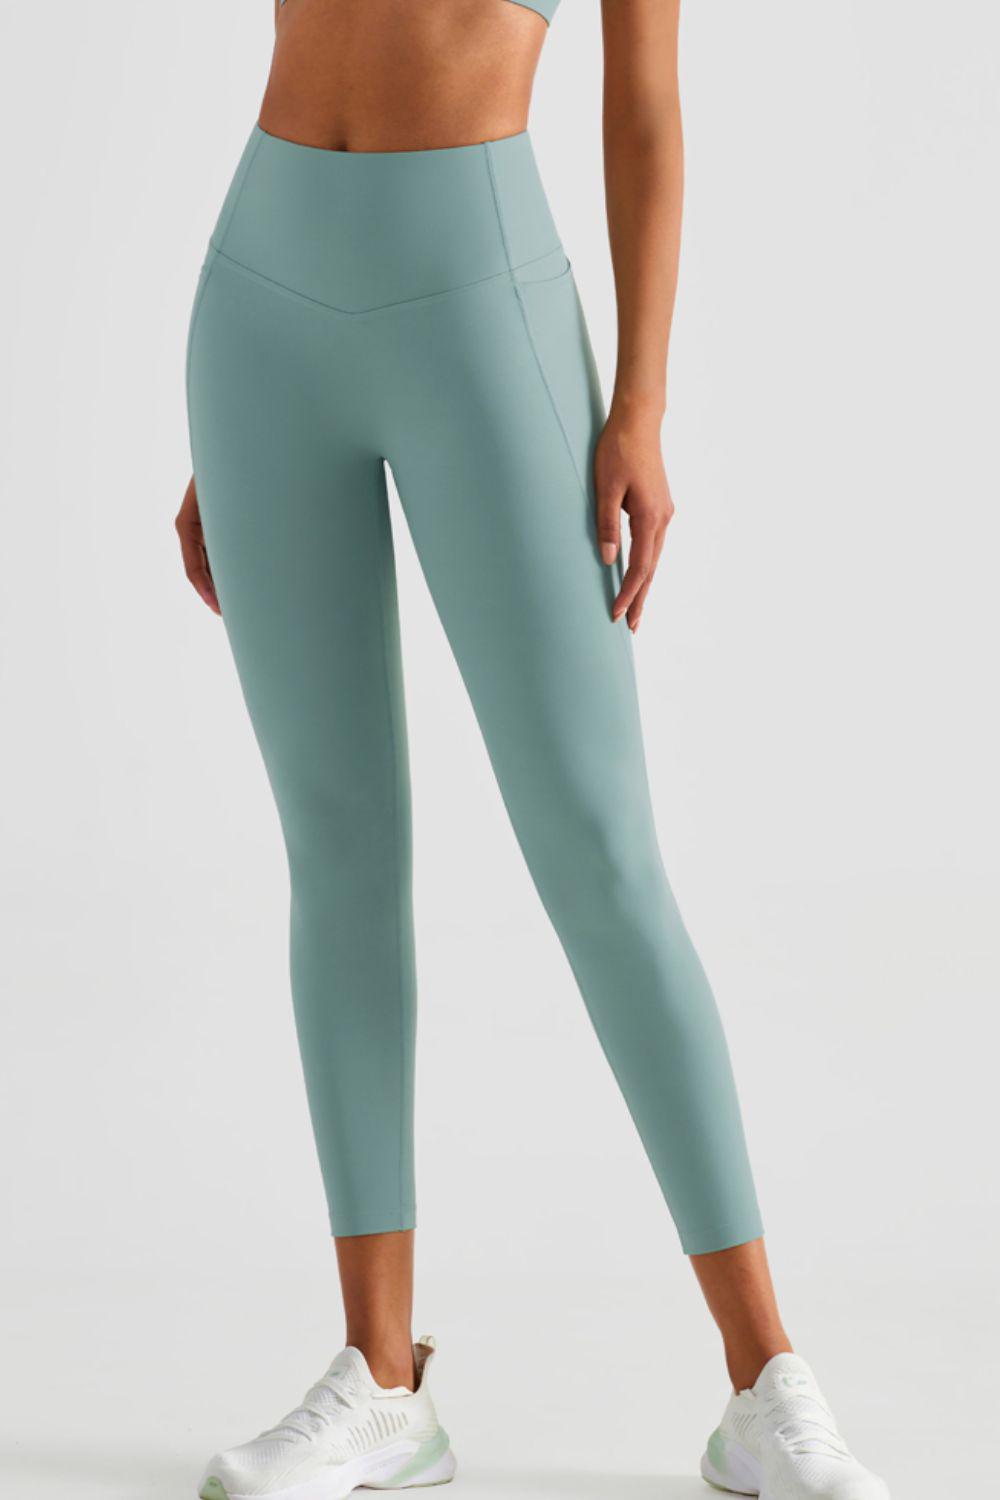 Wide Waistband Sports Leggings with Pockets-BOTTOM SIZES SMALL MEDIUM LARGE-[Adult]-[Female]-Gum Leaf-4-2022 Online Blue Zone Planet